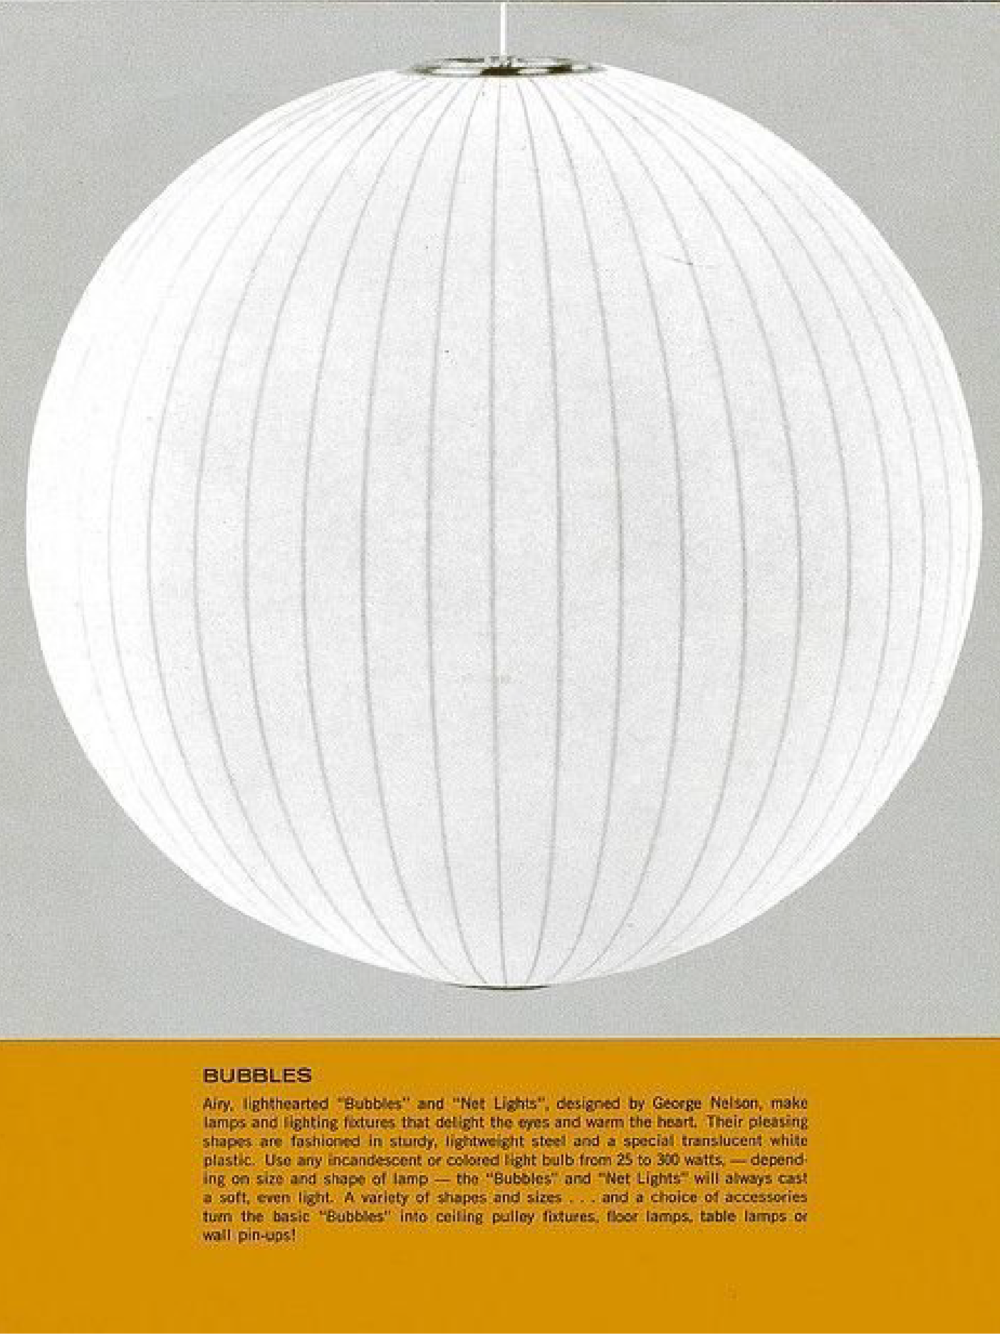 Dwell: A Closer Look at the Iconic Bubble Lamp